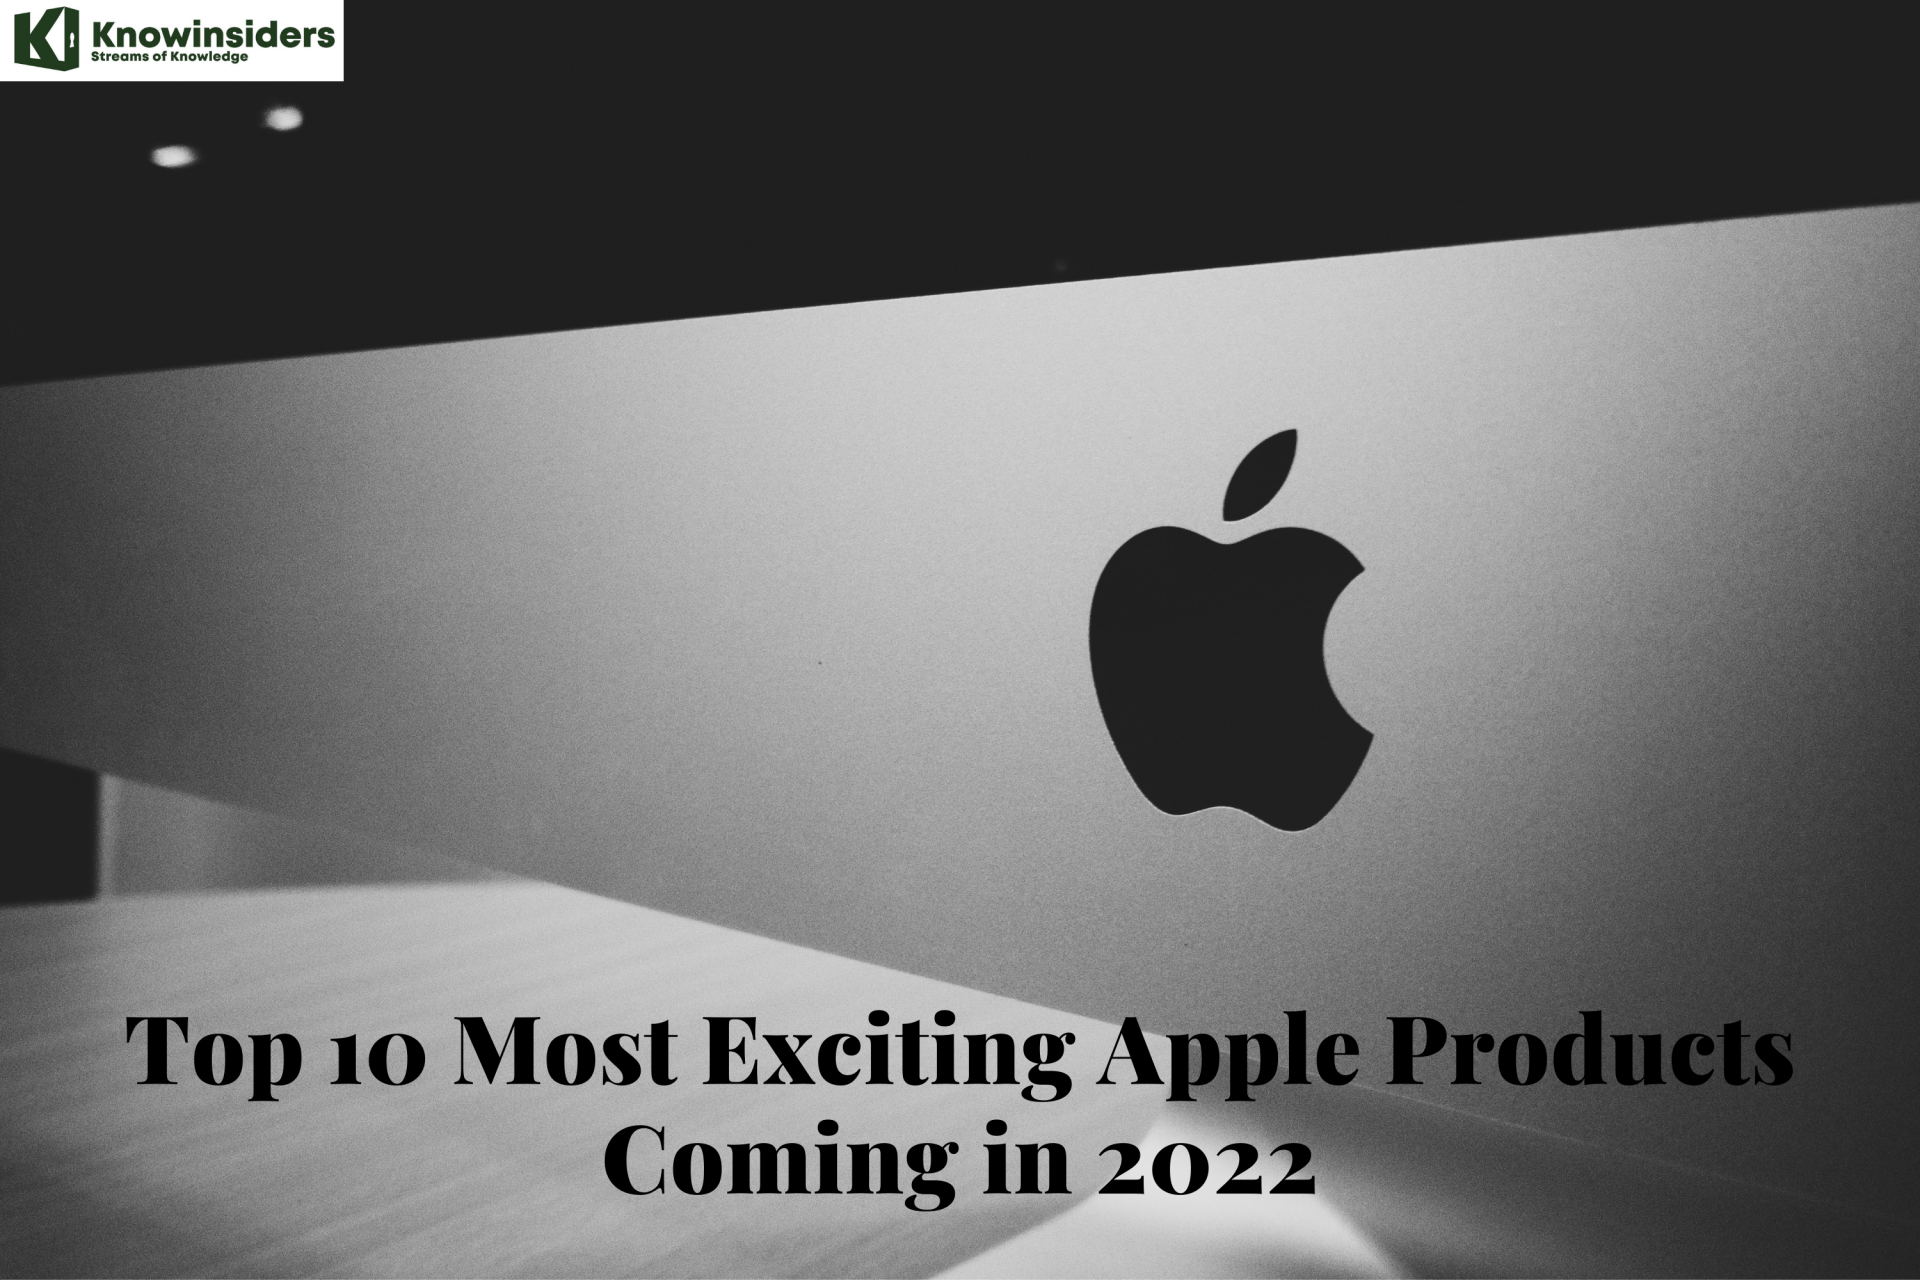 10 Most Exciting Apple Products Coming in 2022